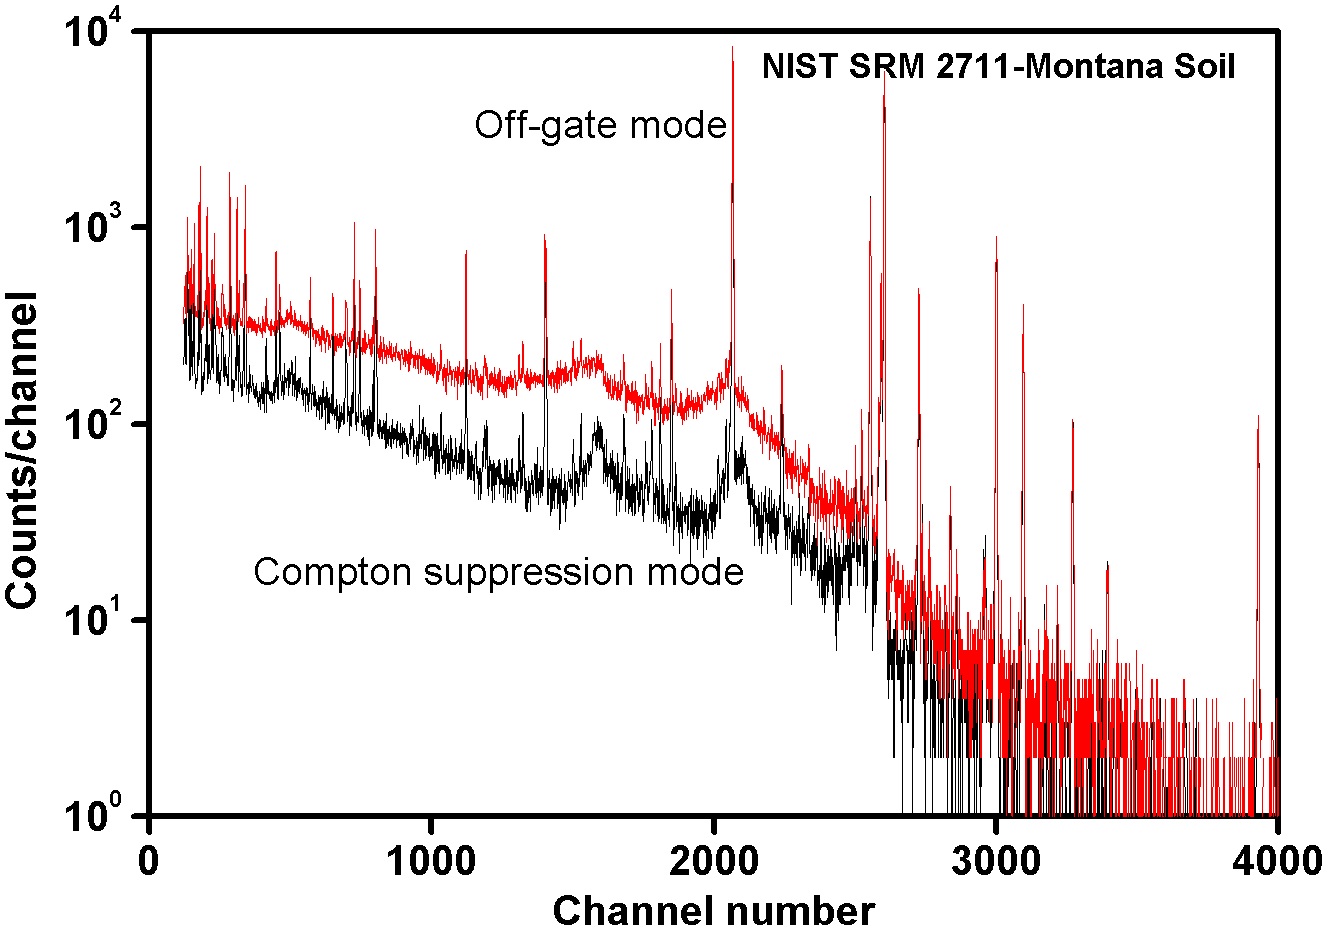 Figure 12. Comparison of spectra from normal and suppression mode for NIST SRM 2711 sample